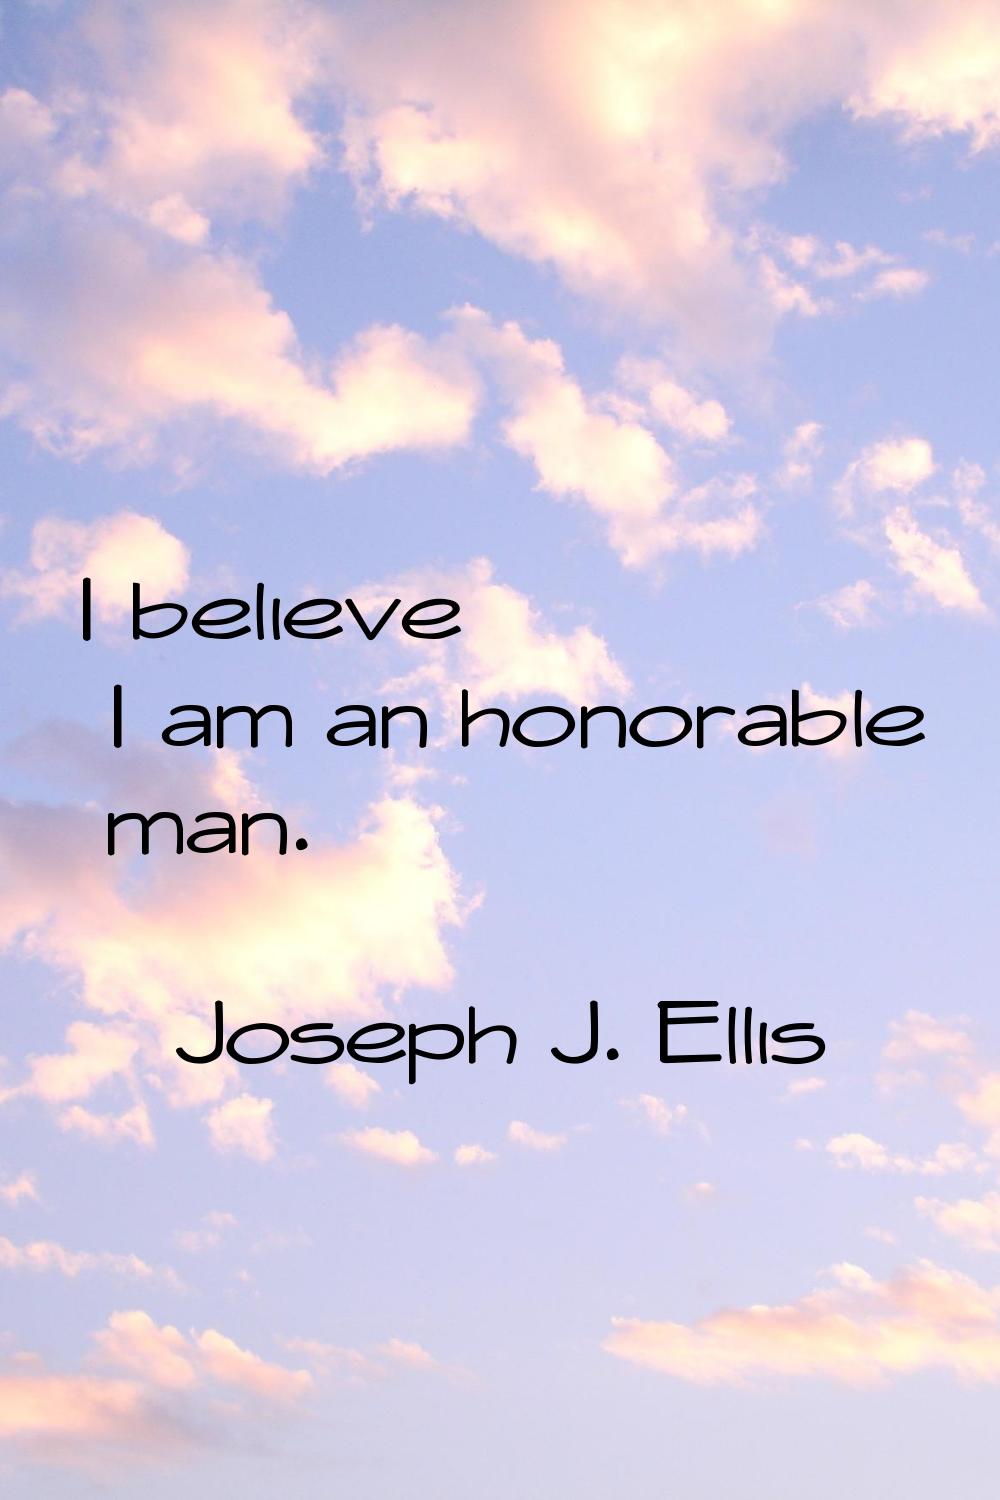 I believe I am an honorable man.